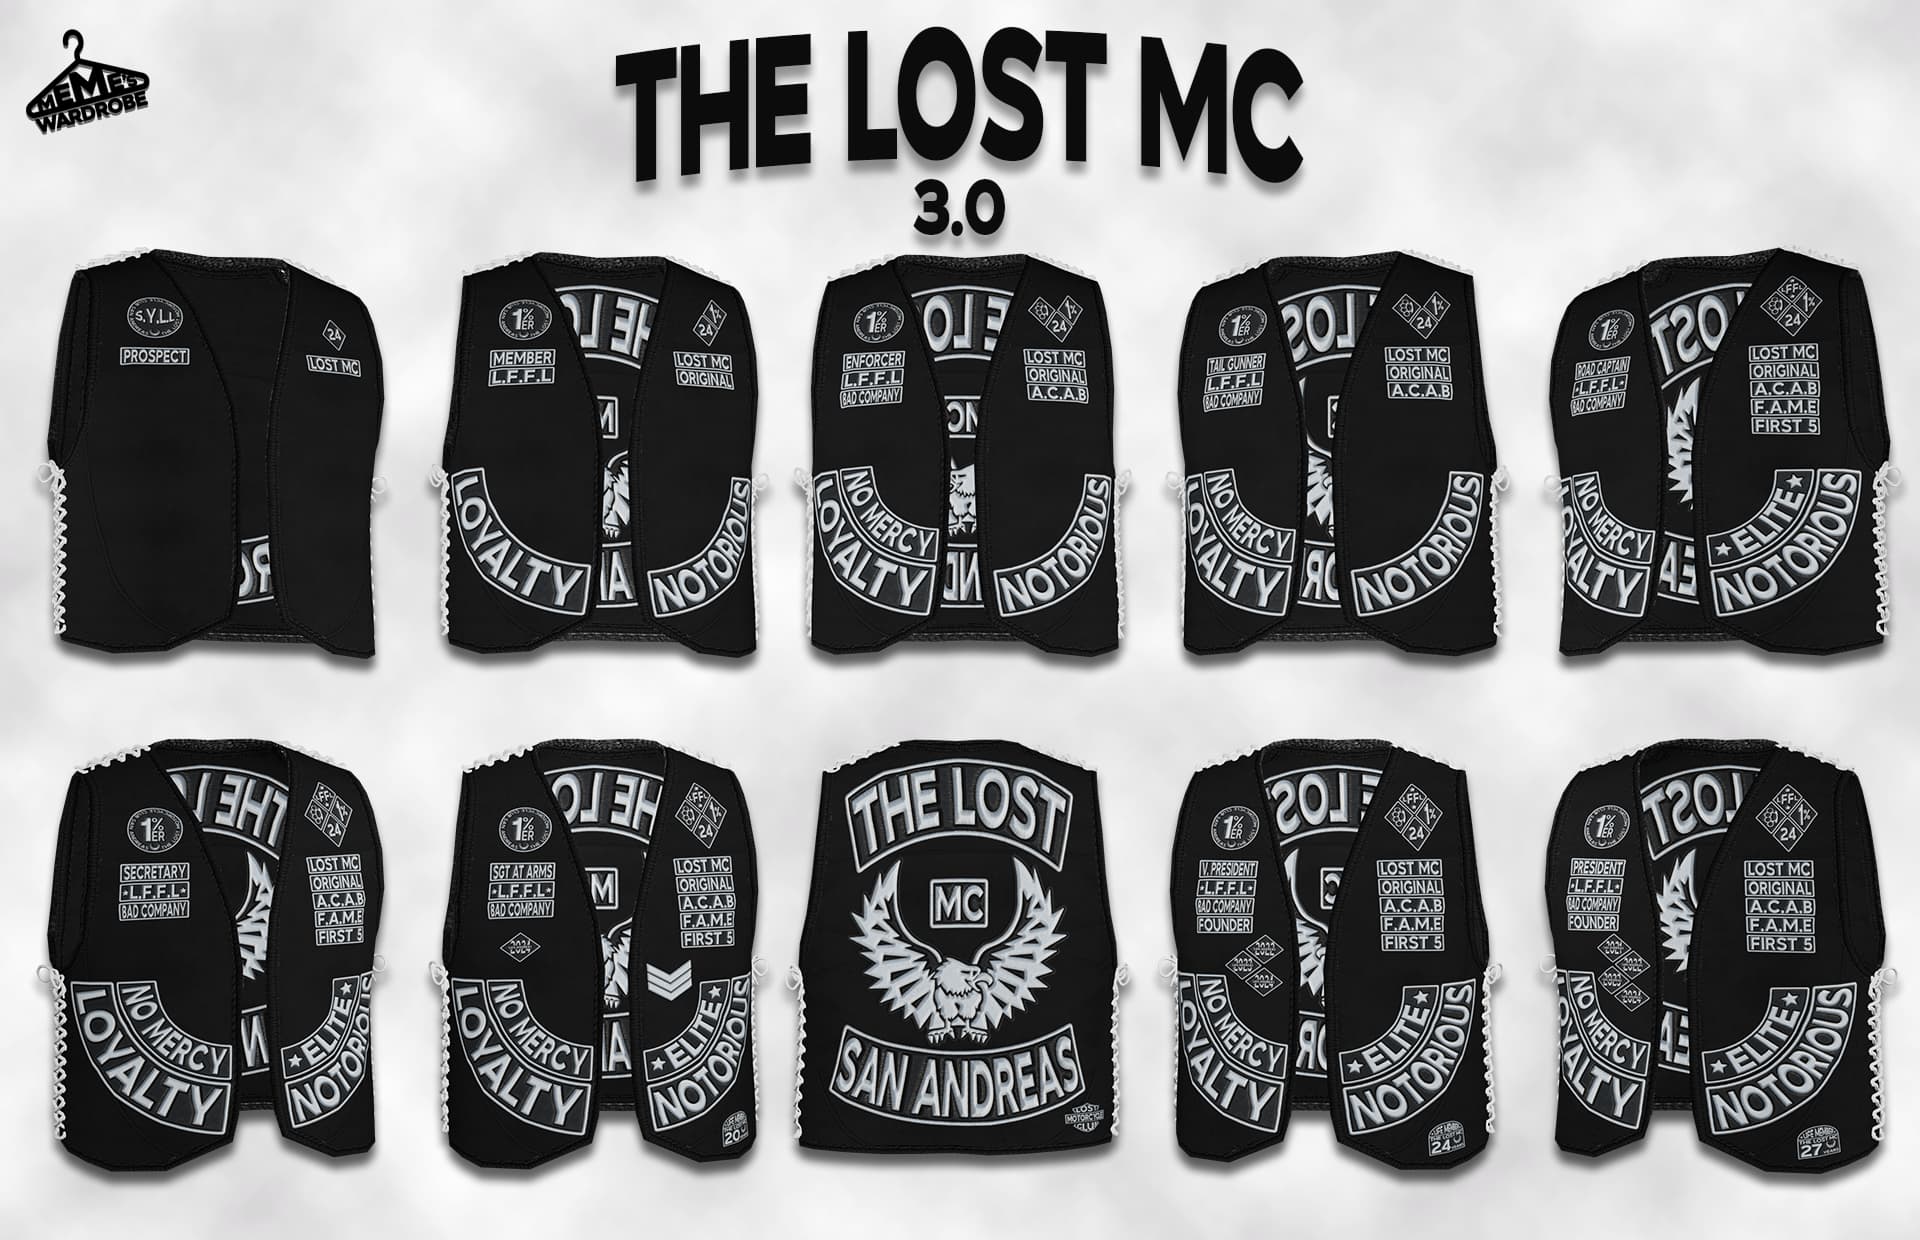 PAID][CLOTHING] The Lost MC (Female Version) - Releases - Cfx.re Community